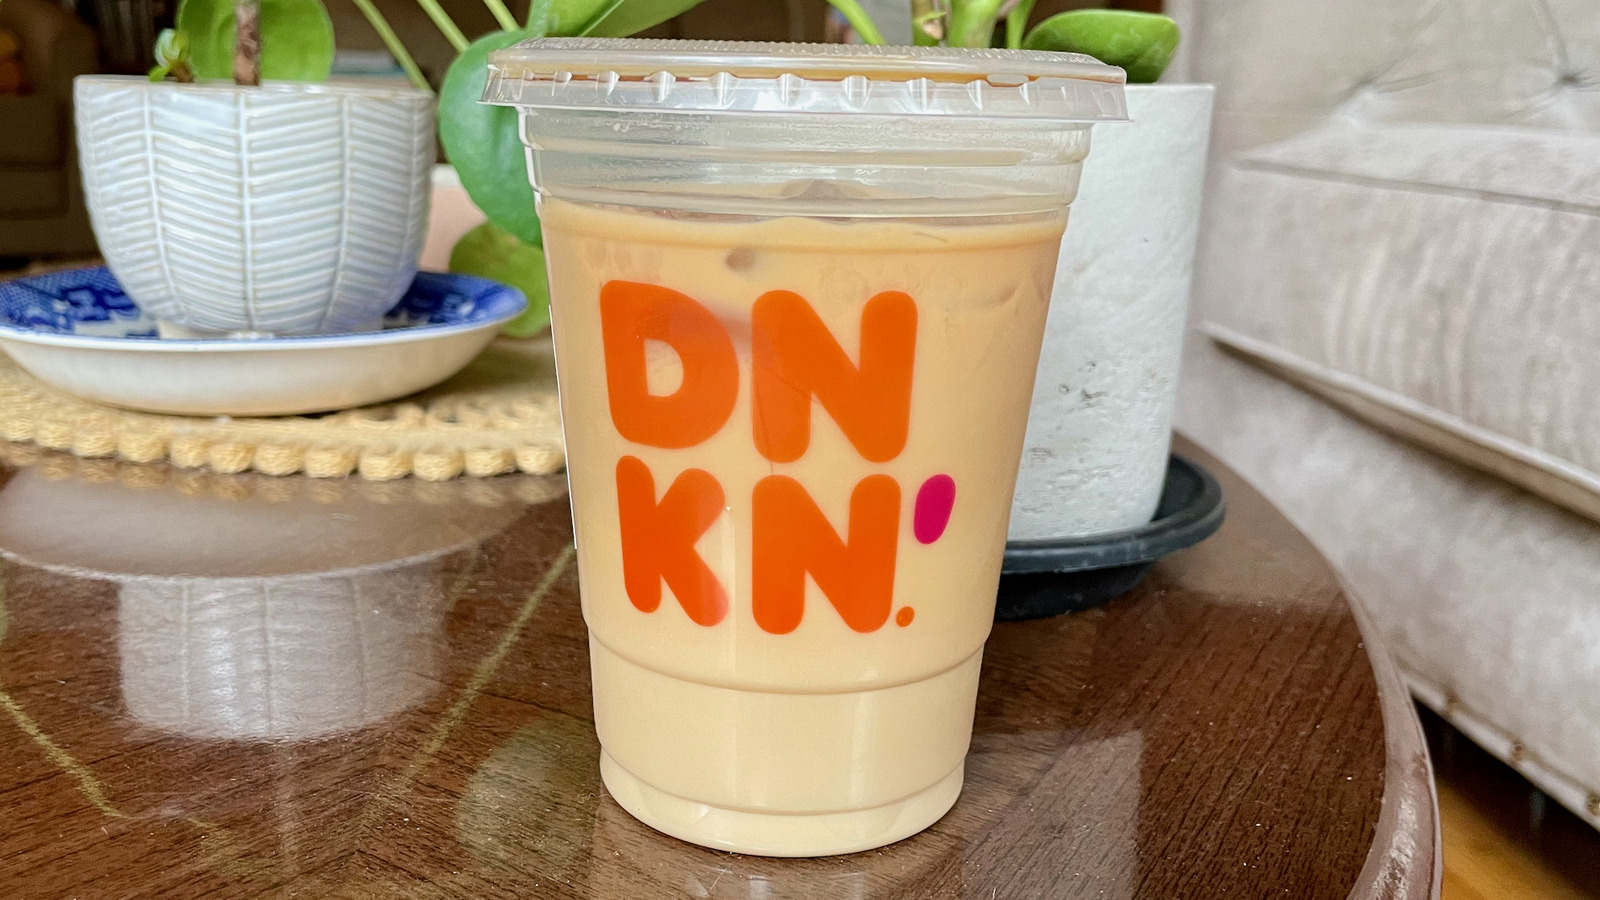 The Brown Sugar Cold Brew at Dunkin' Donuts is About To Become Your New  Go-To Coffee Order